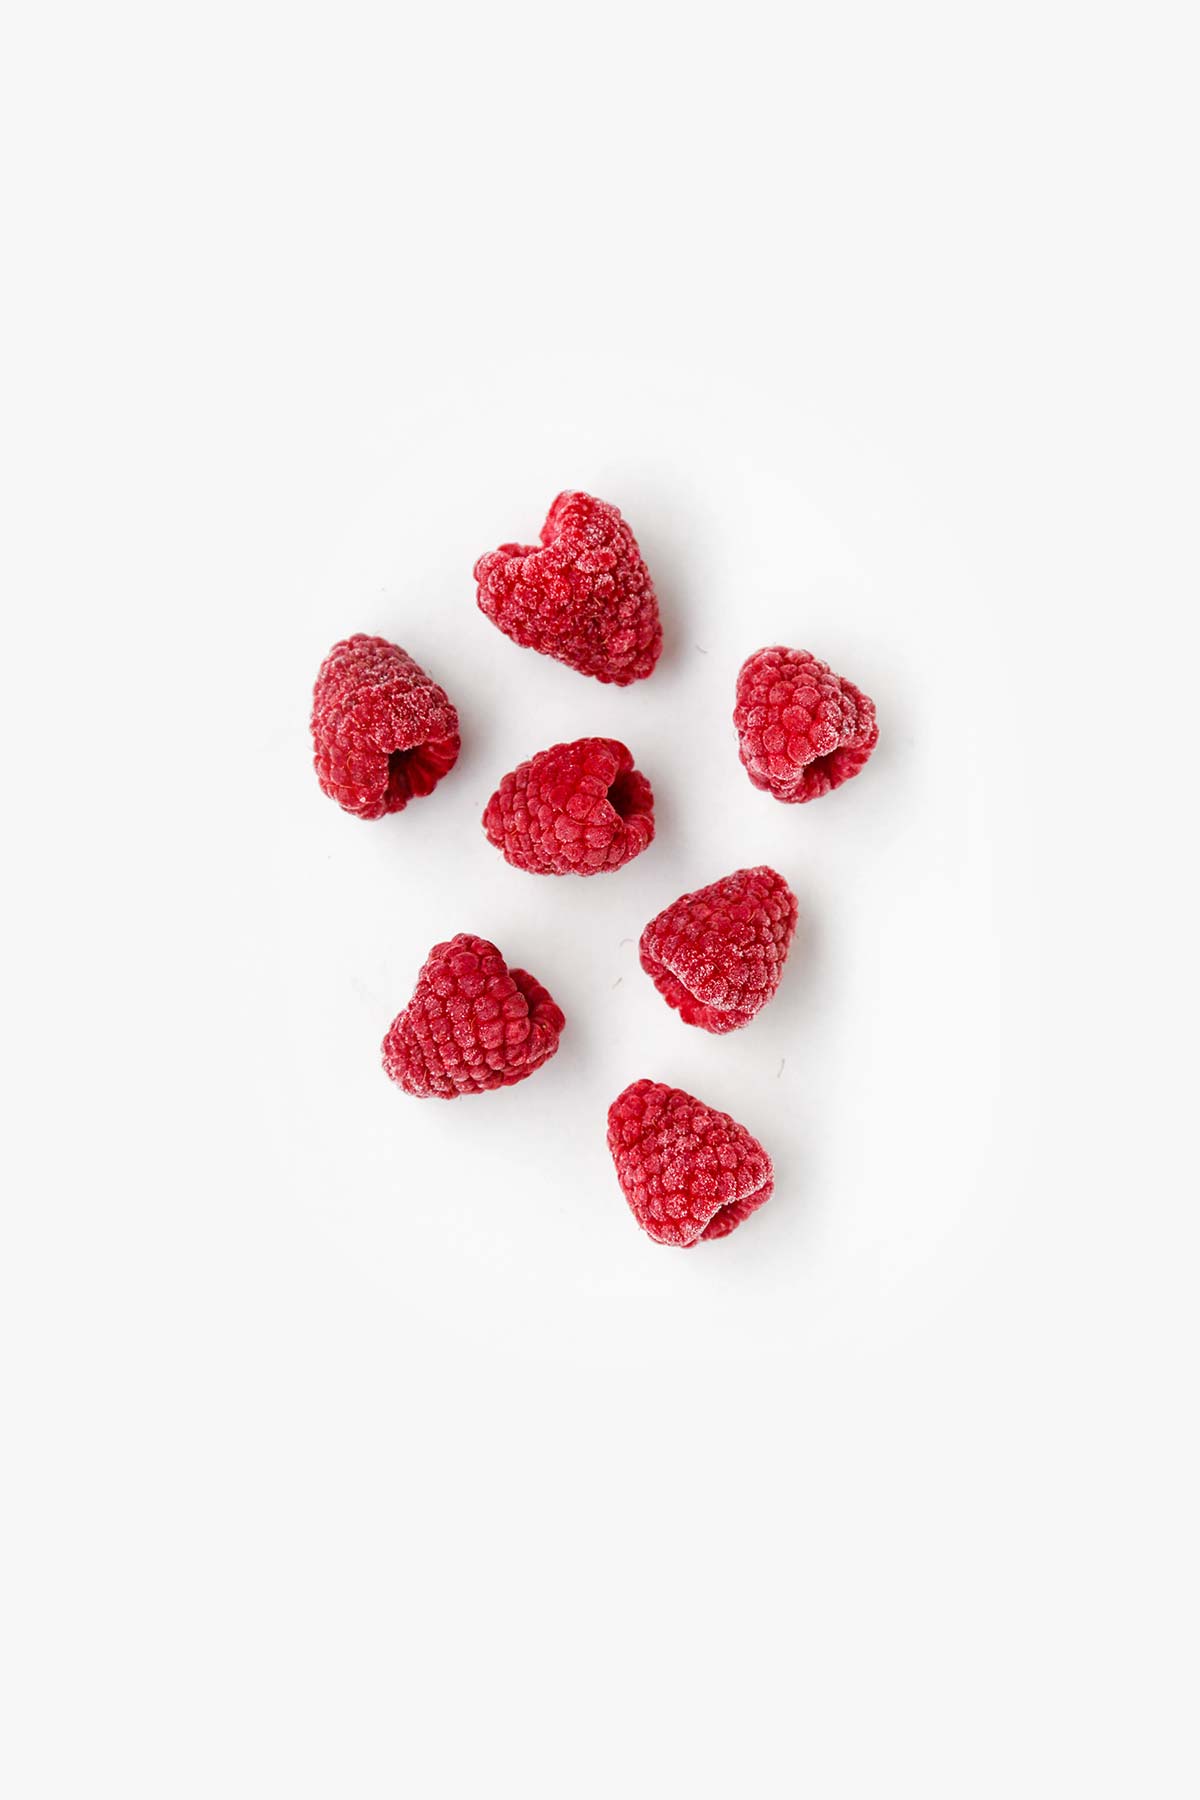 Keto Raspberries, a guide to keto foods for low carb. keto, keto ingredients, keto foods, keto produce, keto fruits, ketogenic diet, keto shopping list, low carb, low carb foods, low carb fruits, lchf, lchf foods, lchf fruit